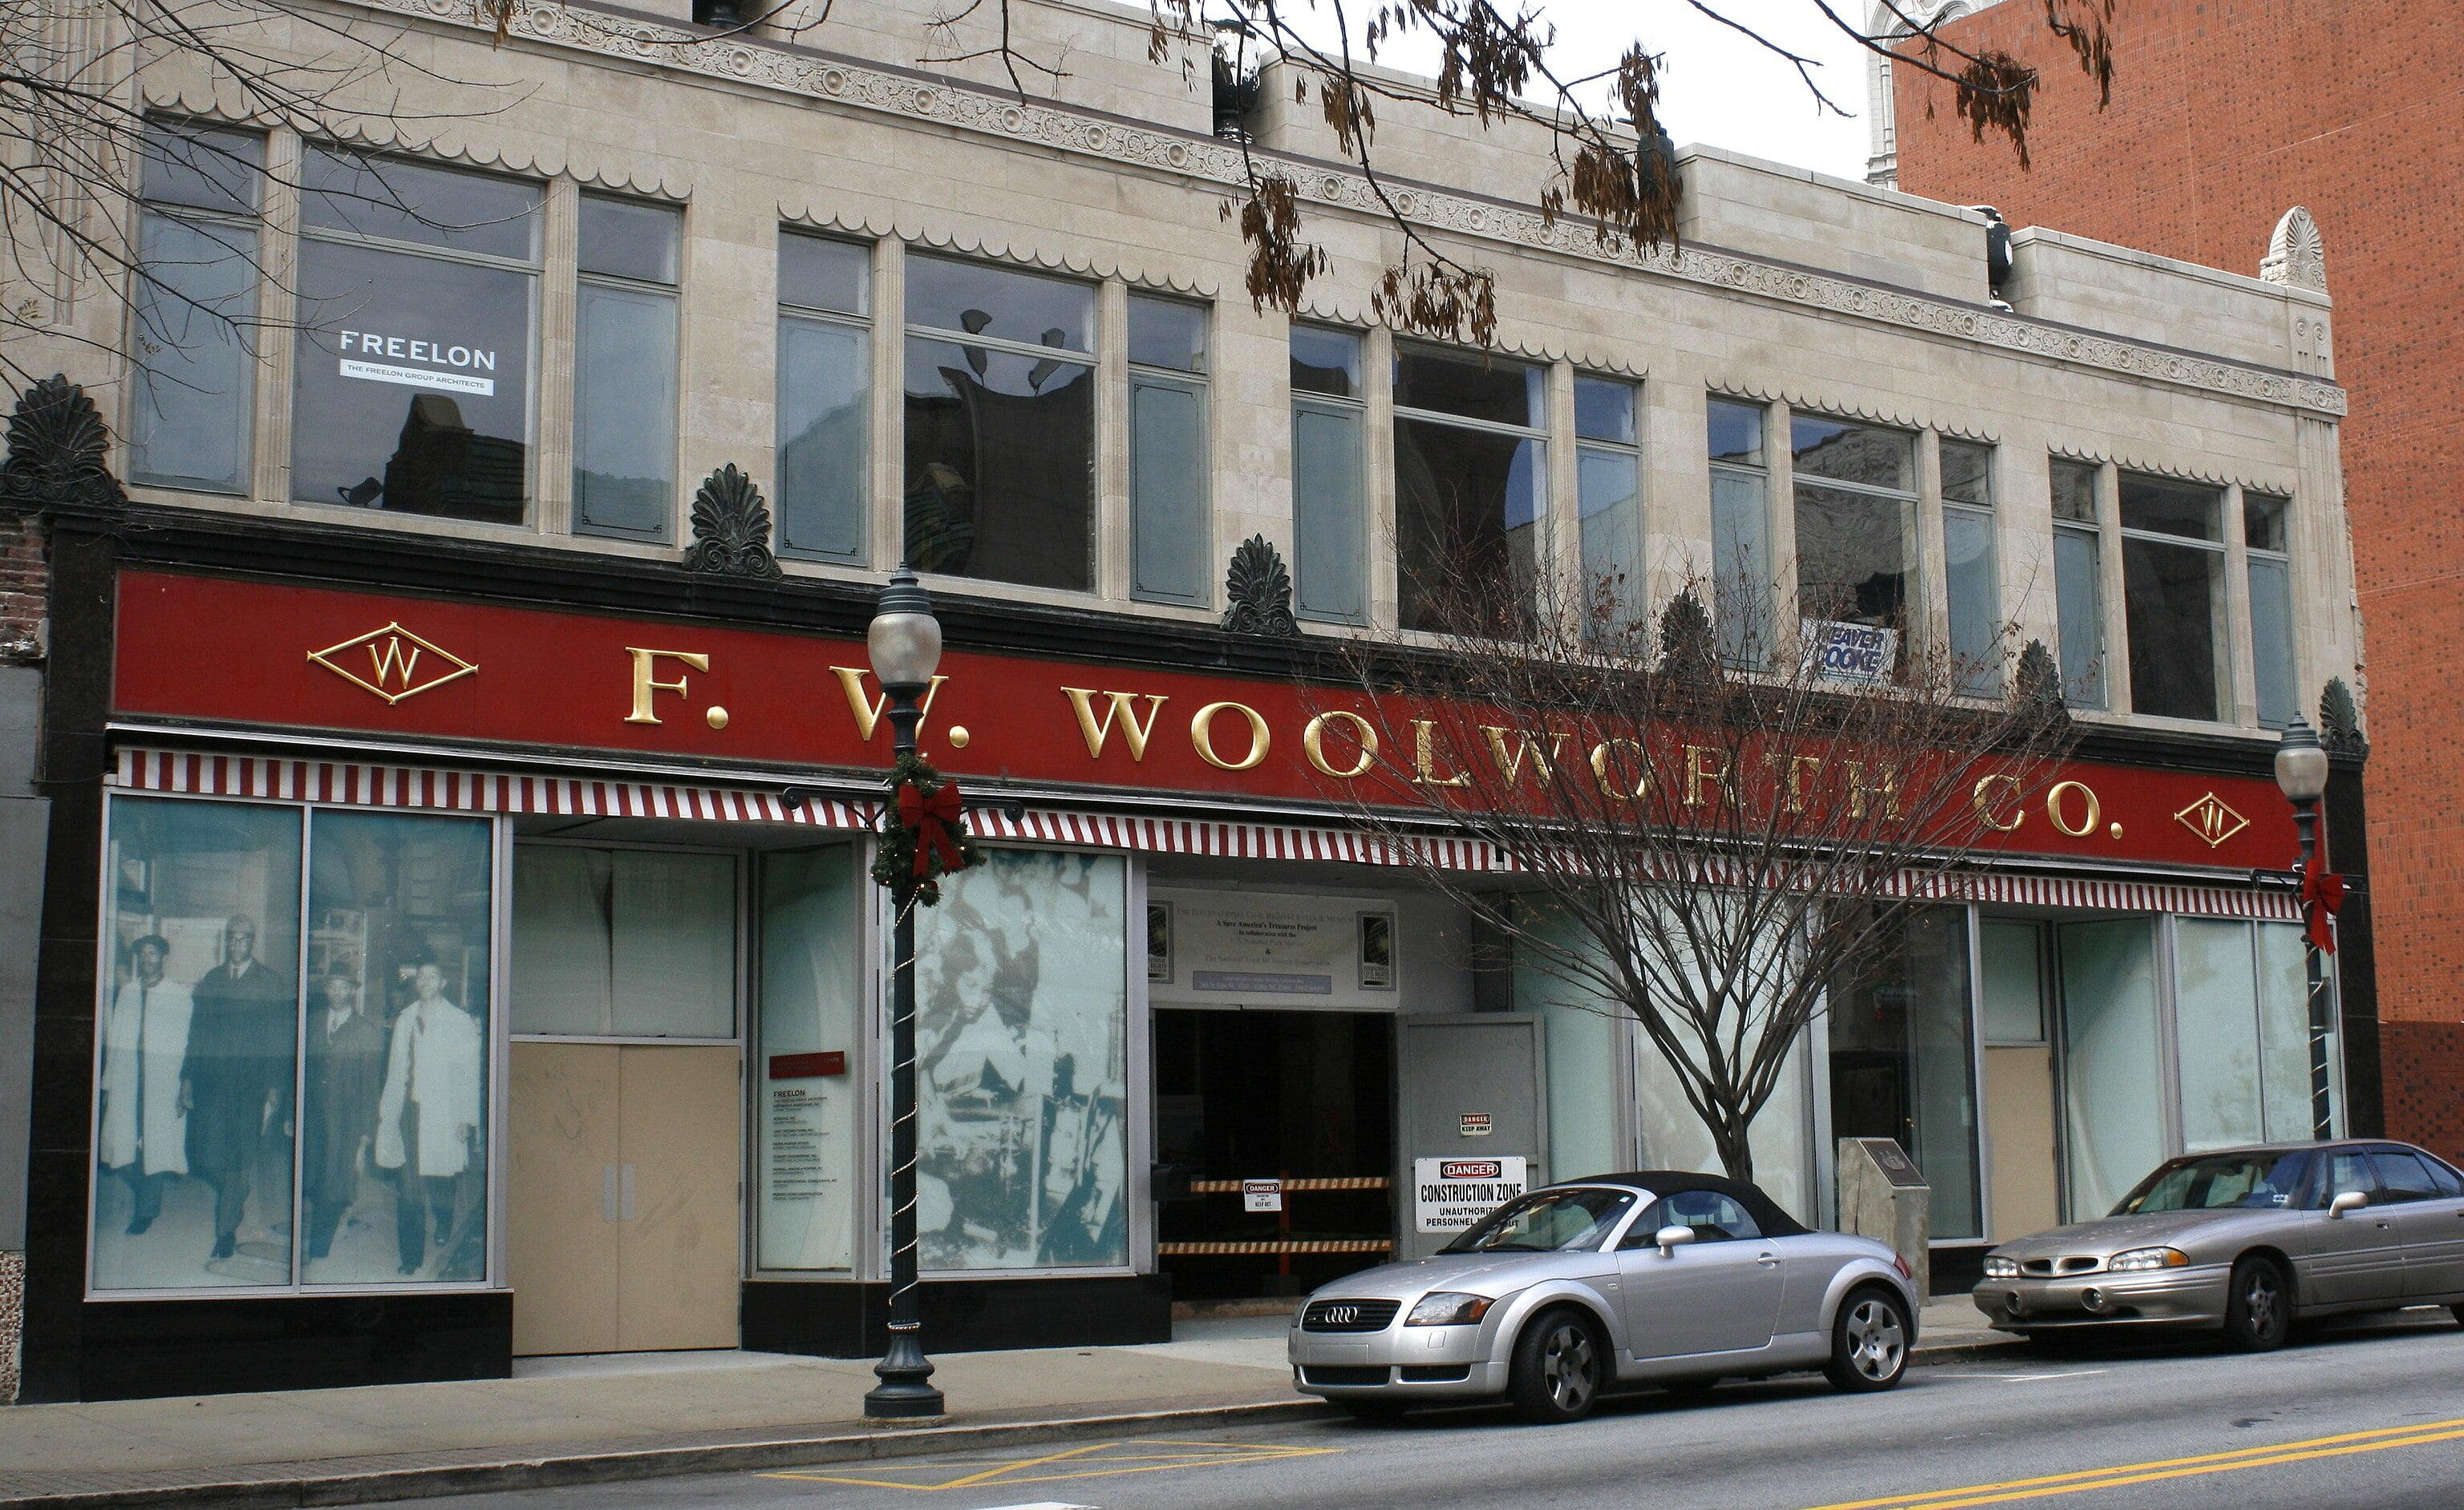 Greensboro - Former F. W. Woolworth Co. store in Greensboro, North Carolina, the site of a now-famous "sit-in" protest by black college students in 1960.